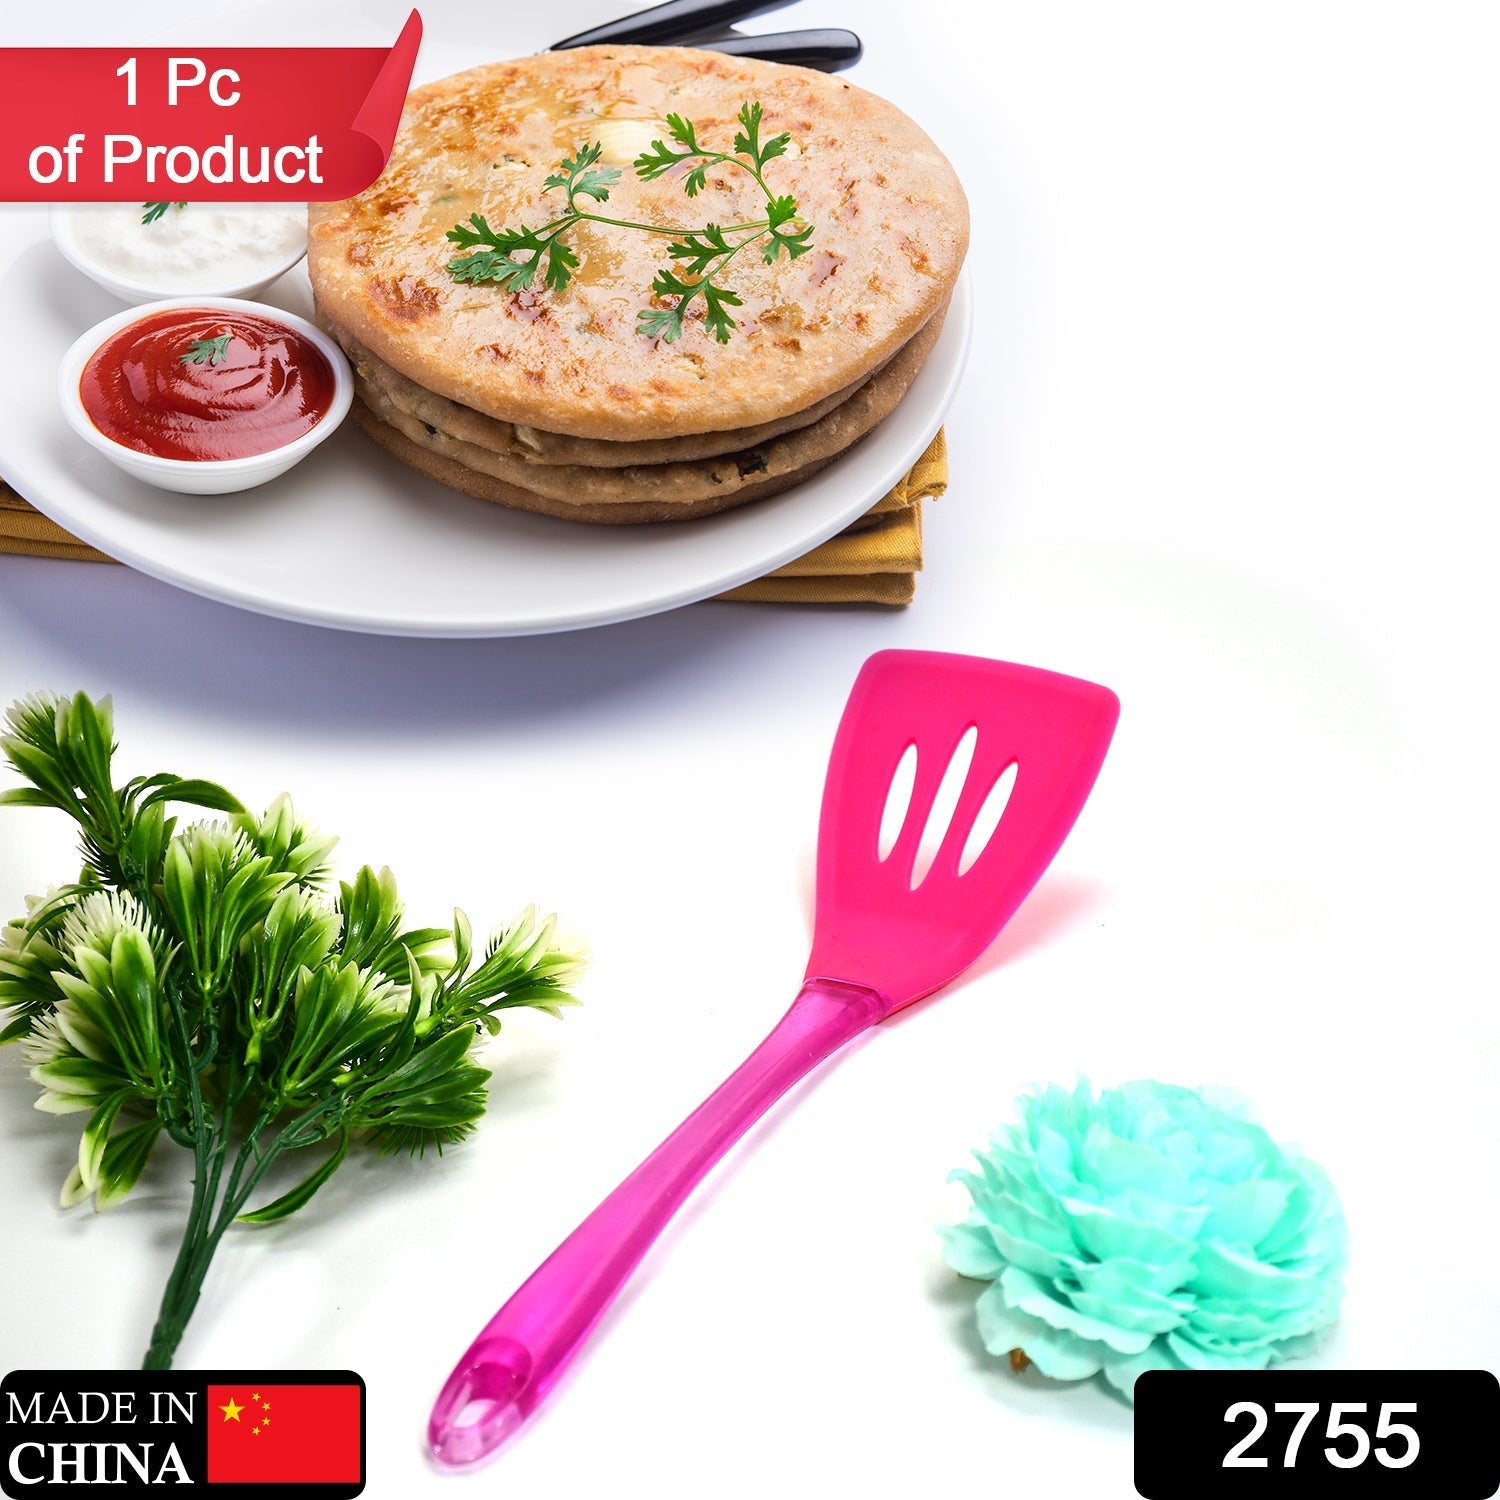 2755 KITCHEN TURNER HEAT RESISTANT SILICONE NON-STICK SILICONE TURNER GRIP WITH LONG HANDLE COOKING TURNER DeoDap